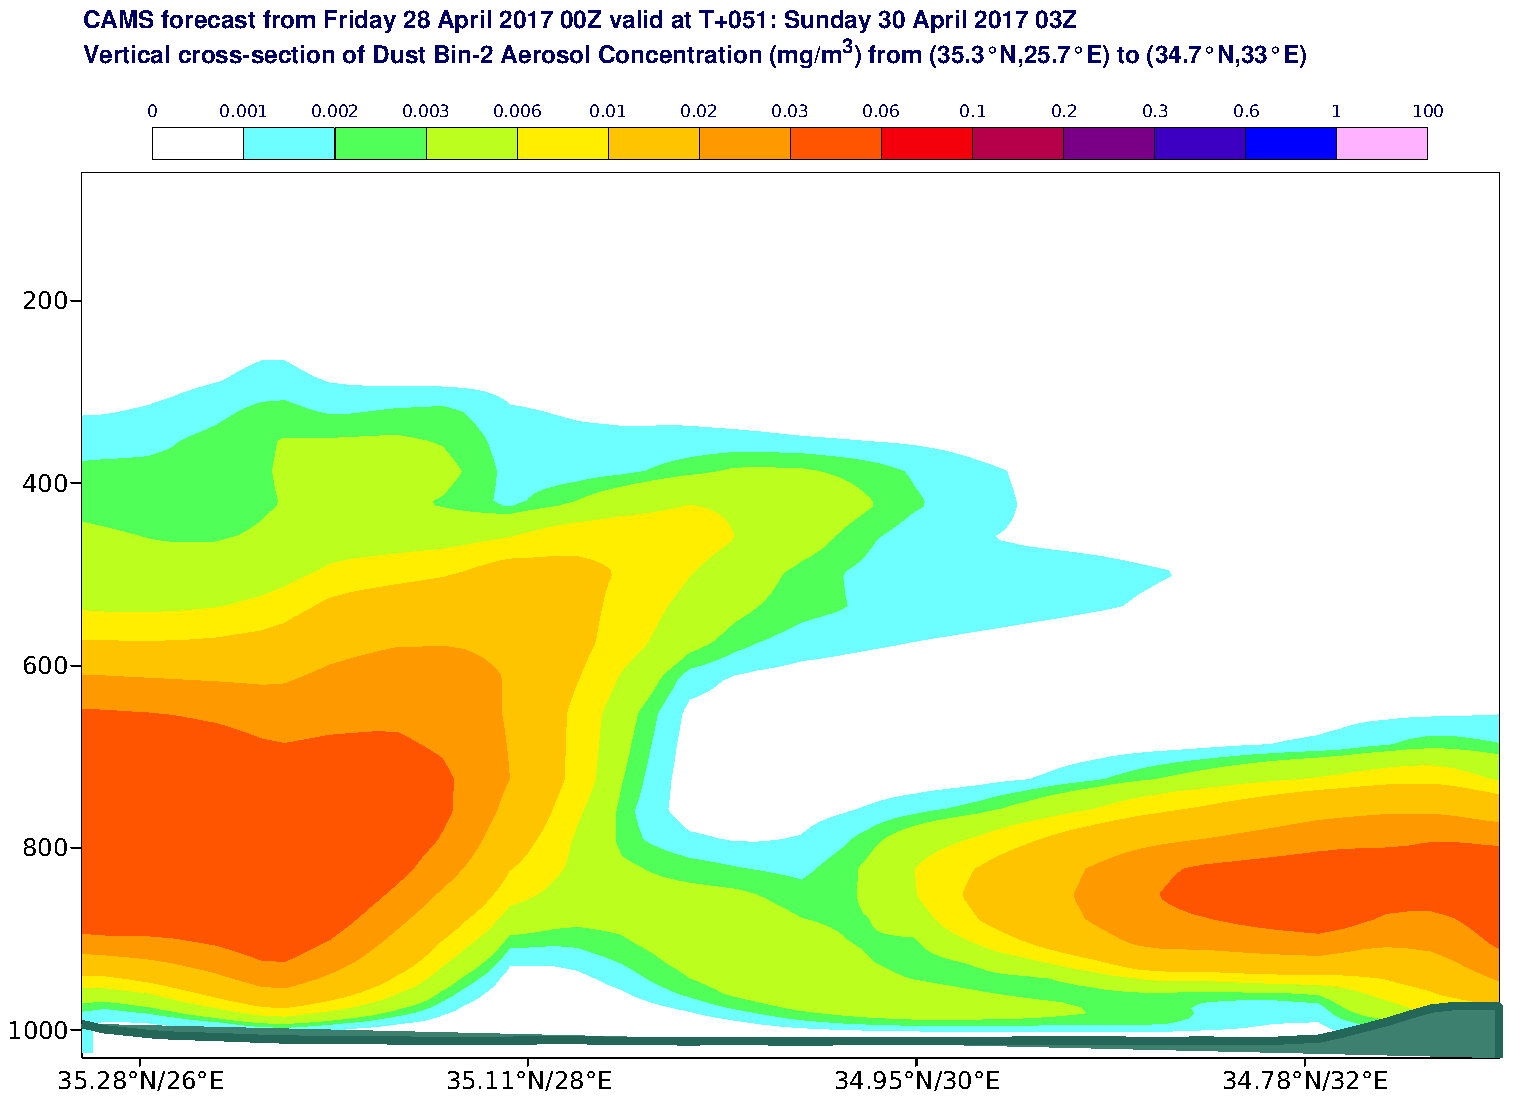 Vertical cross-section of Dust Bin-2 Aerosol Concentration (mg/m3) valid at T51 - 2017-04-30 03:00